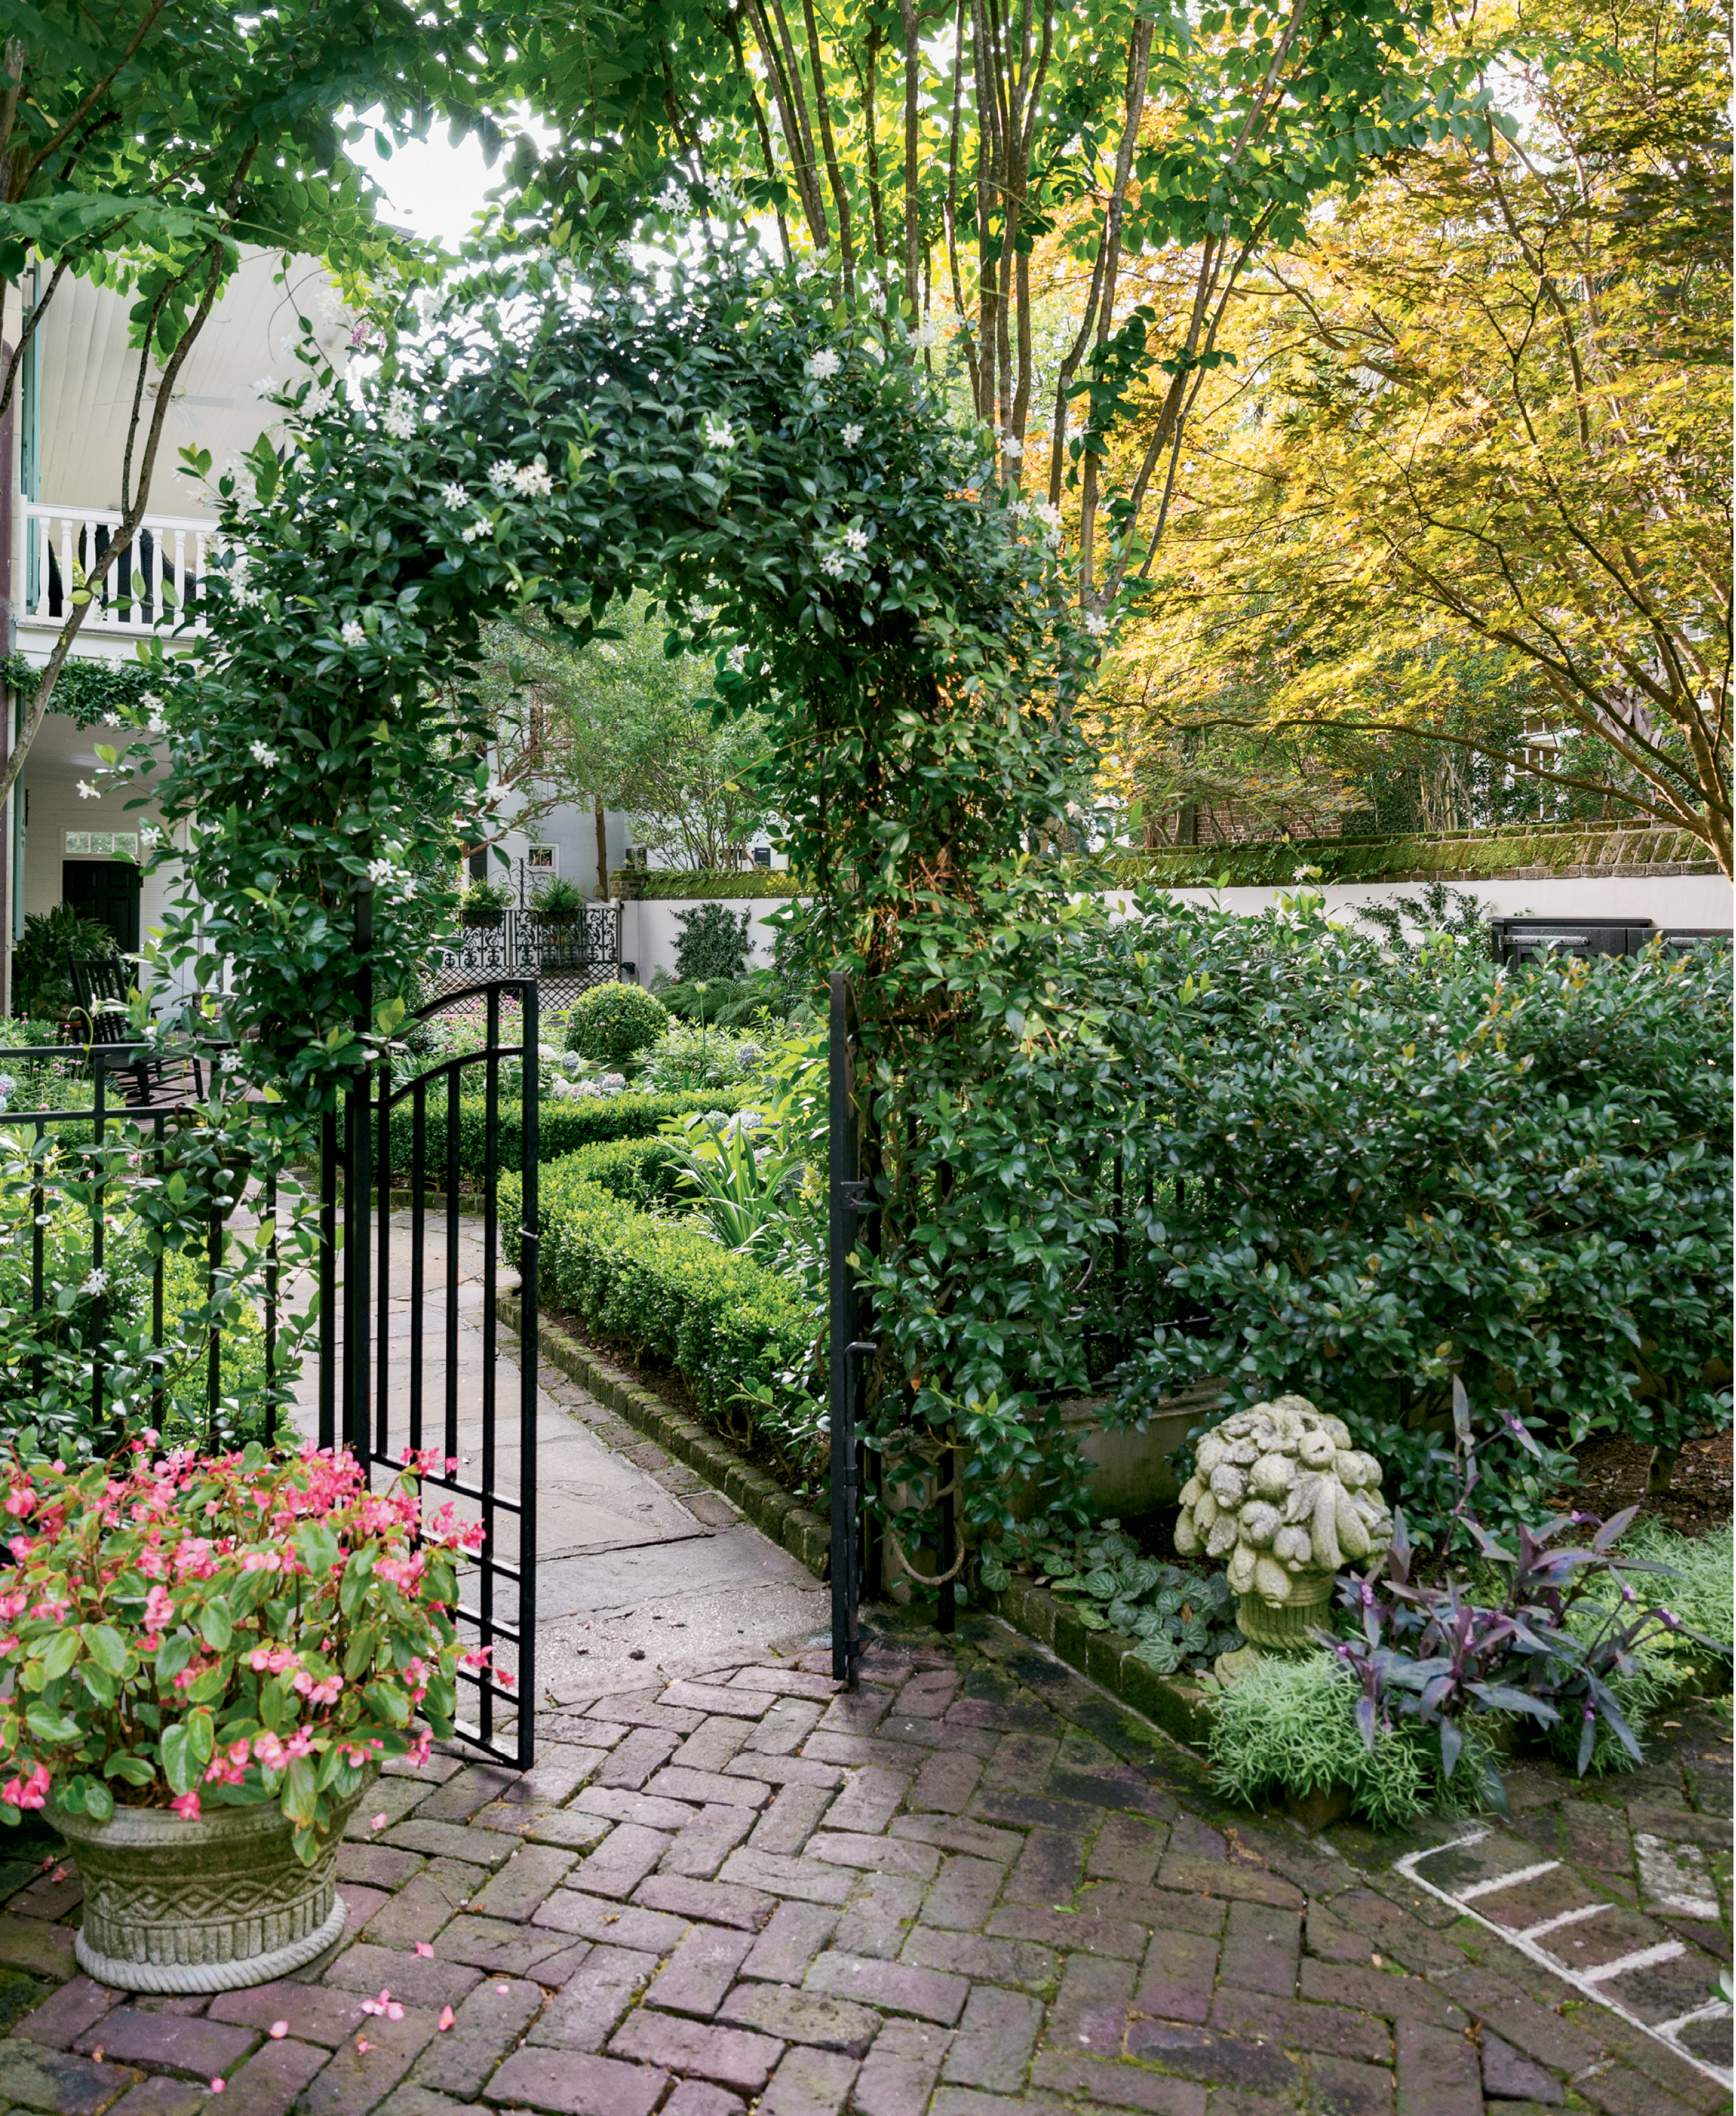 A gate and an arbor covered in confederate jasmine lead the way to the rear courtyard garden.